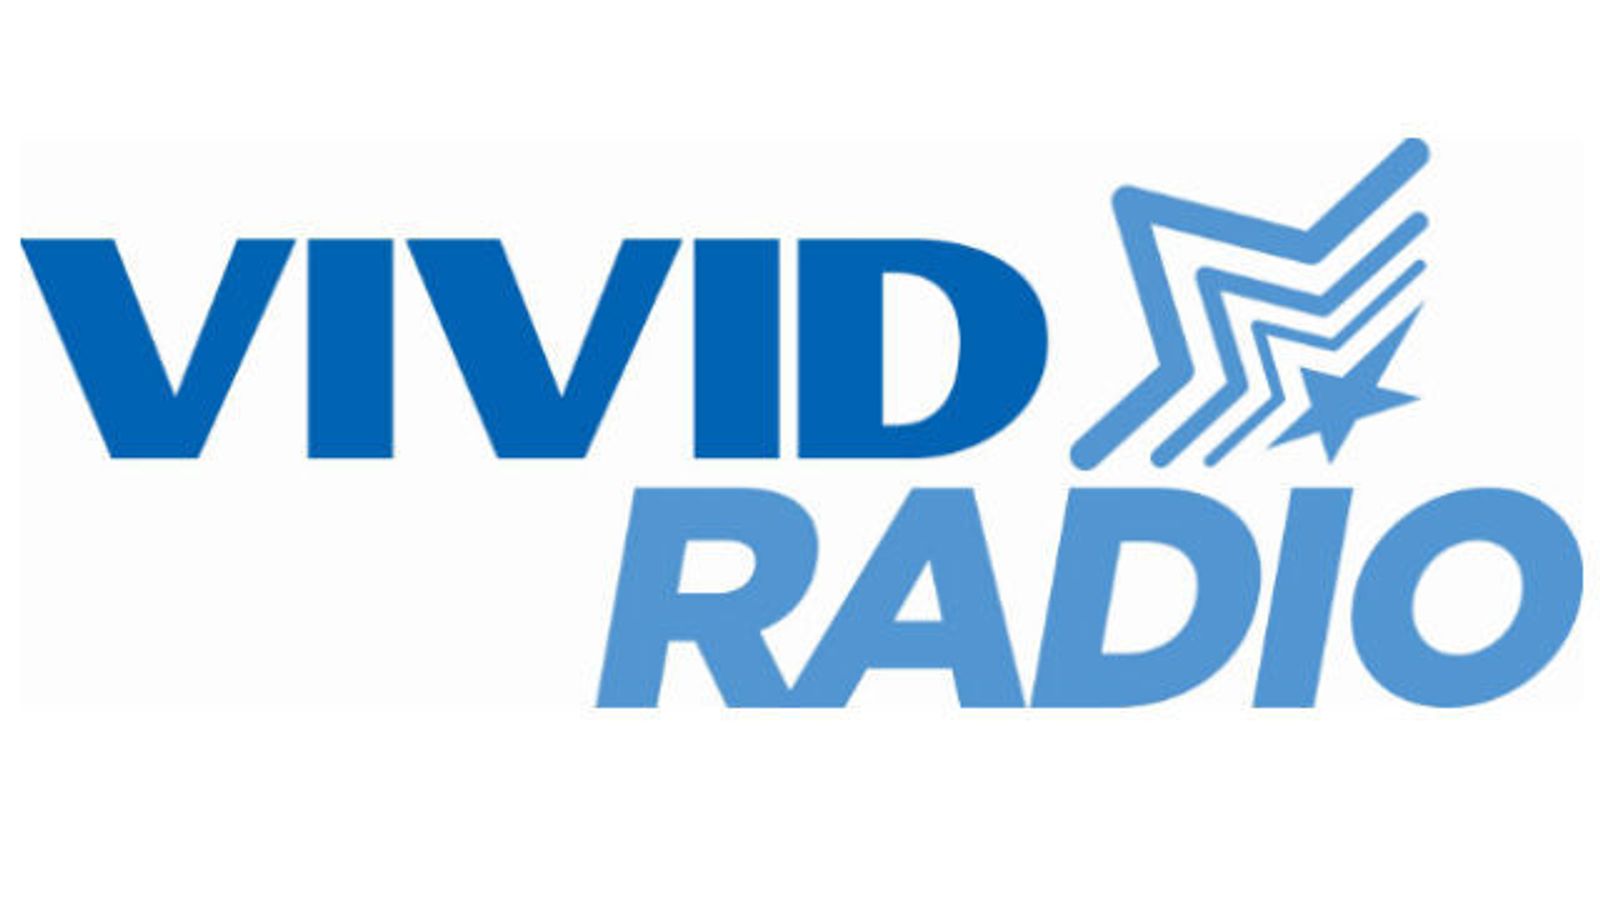 Vivid Radio Roundtable With 6 Top Directors Set for Friday